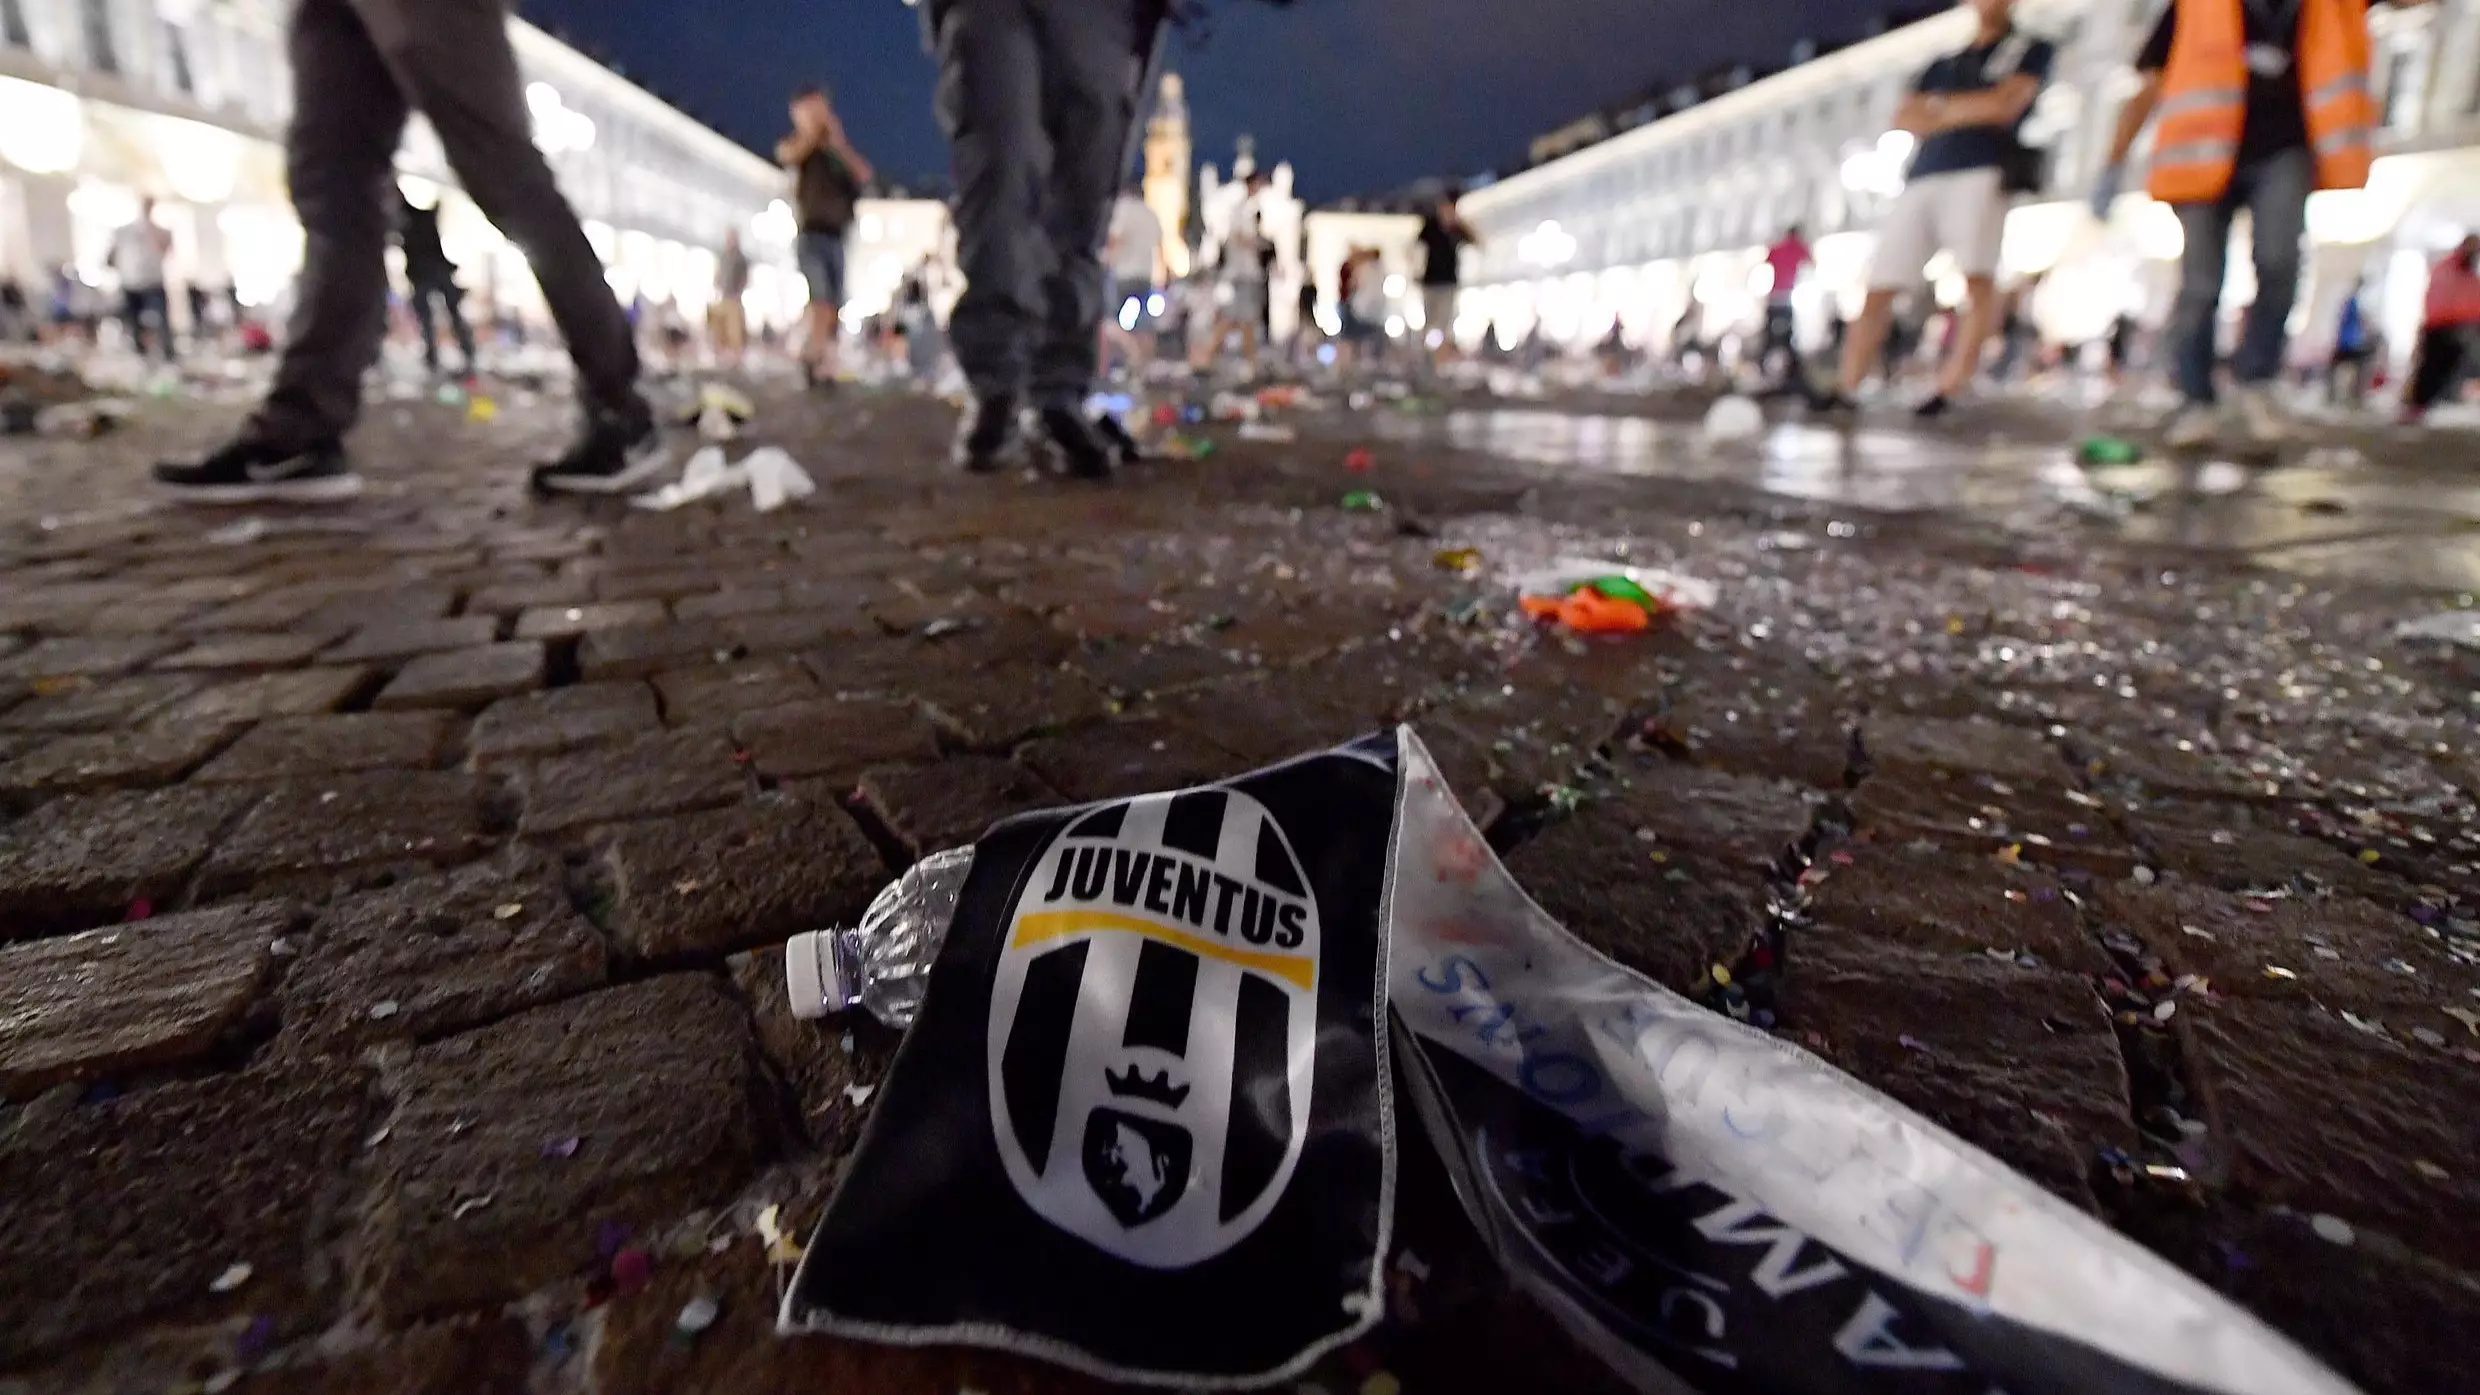 Panicked Football Fans Cause Stampede After Firecrackers Set Off In Italy